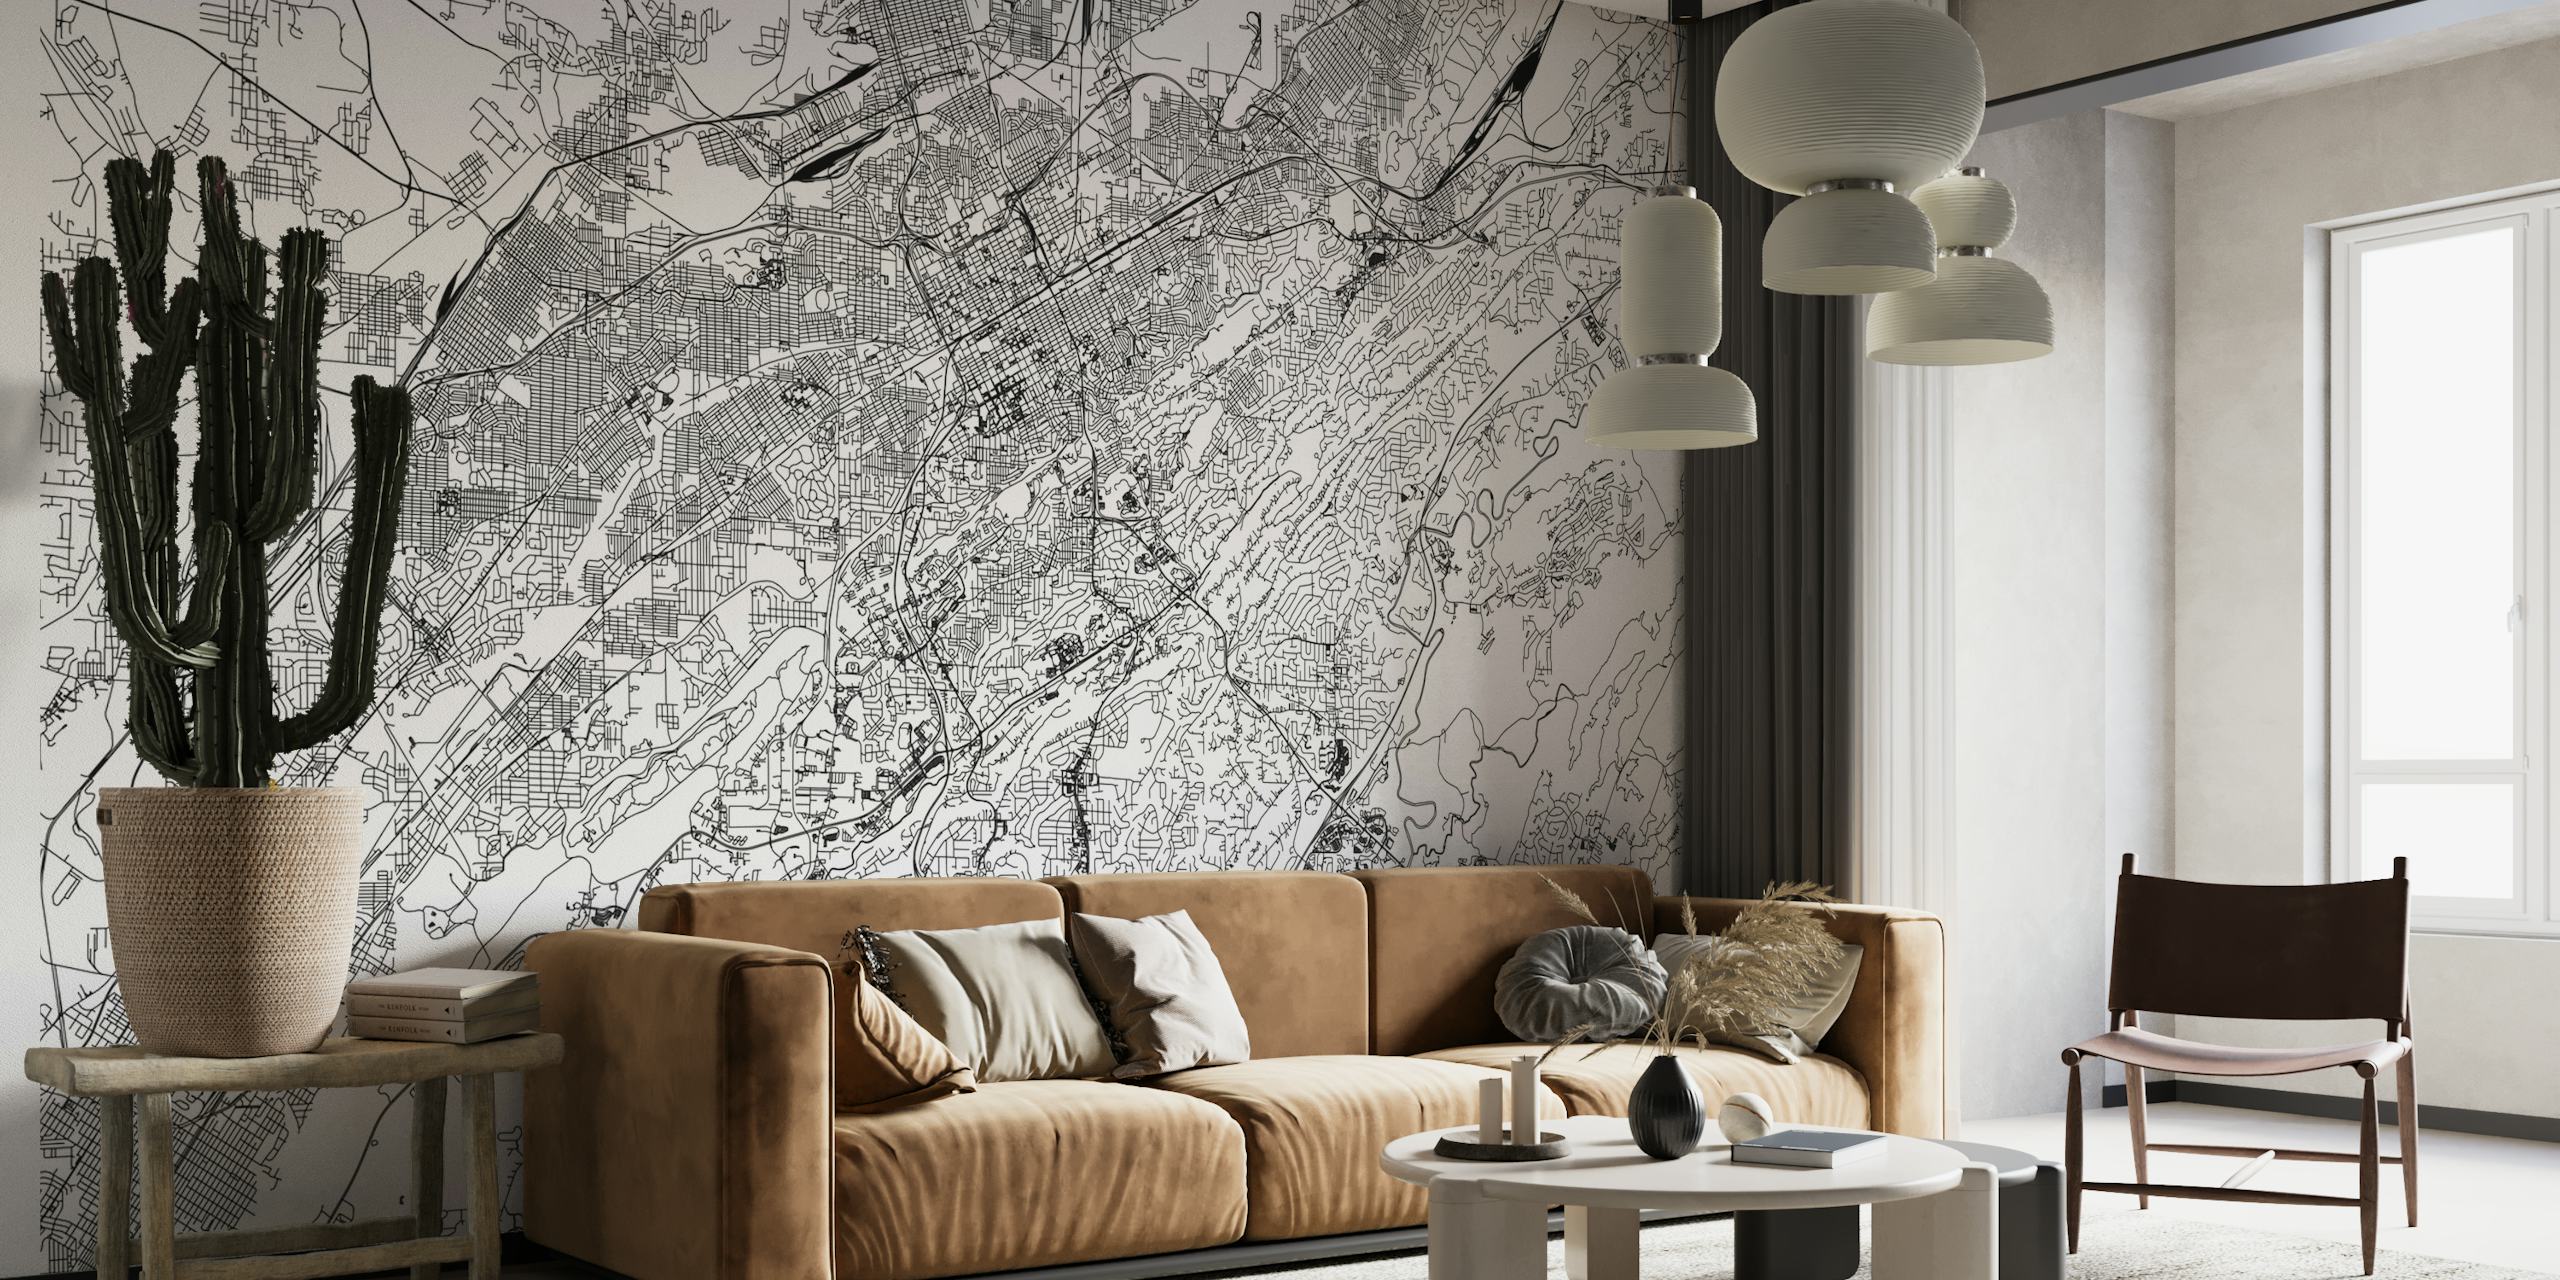 Historical Birmingham map wallpaper mural - An eco-friendly home and office decoration